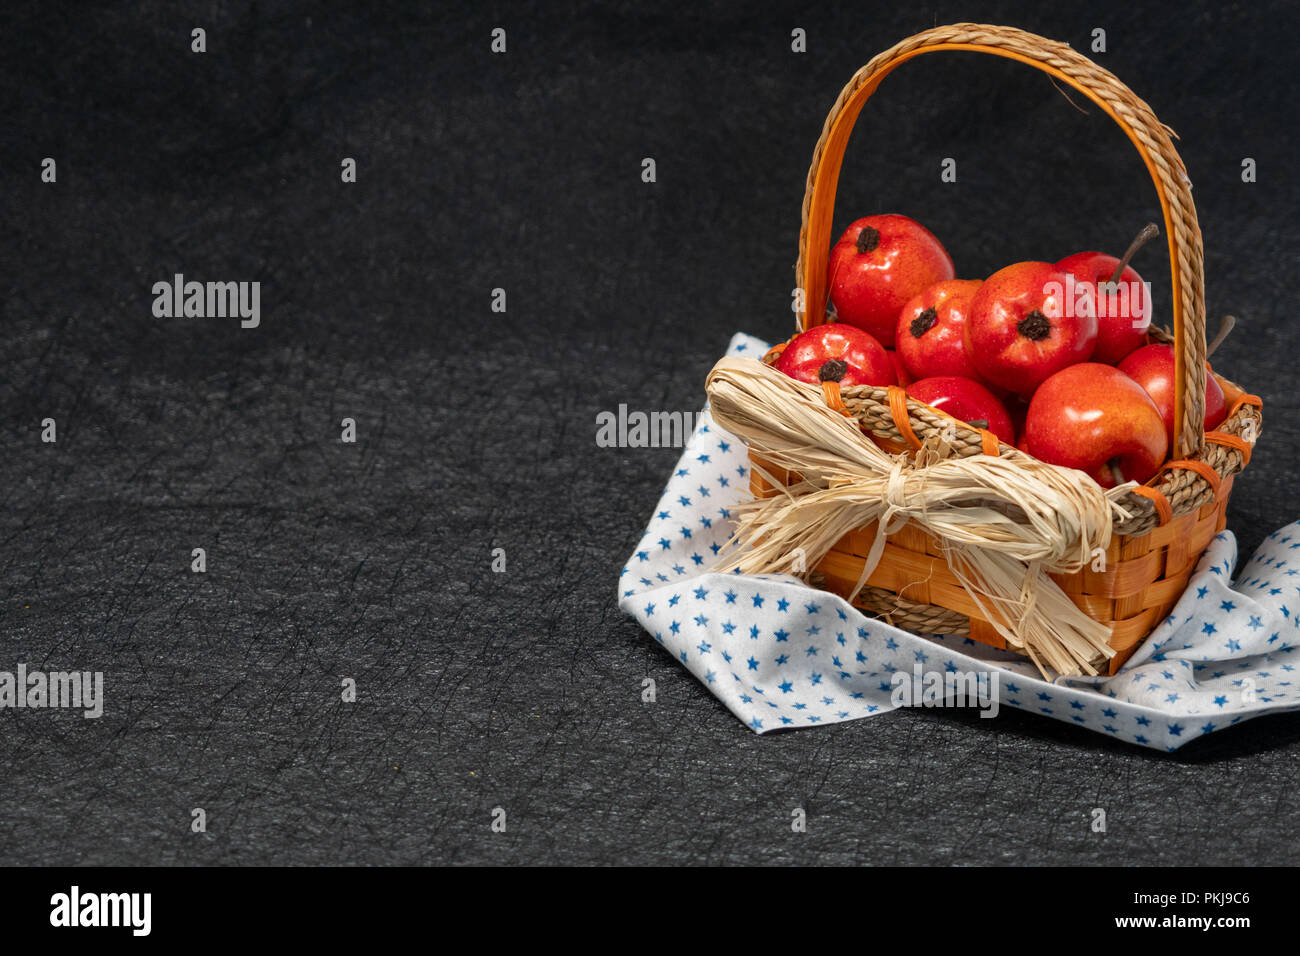 Apples in a straw basket over a black background. Fall and autumn concept, also works for Fourth of July - star napkin Stock Photo